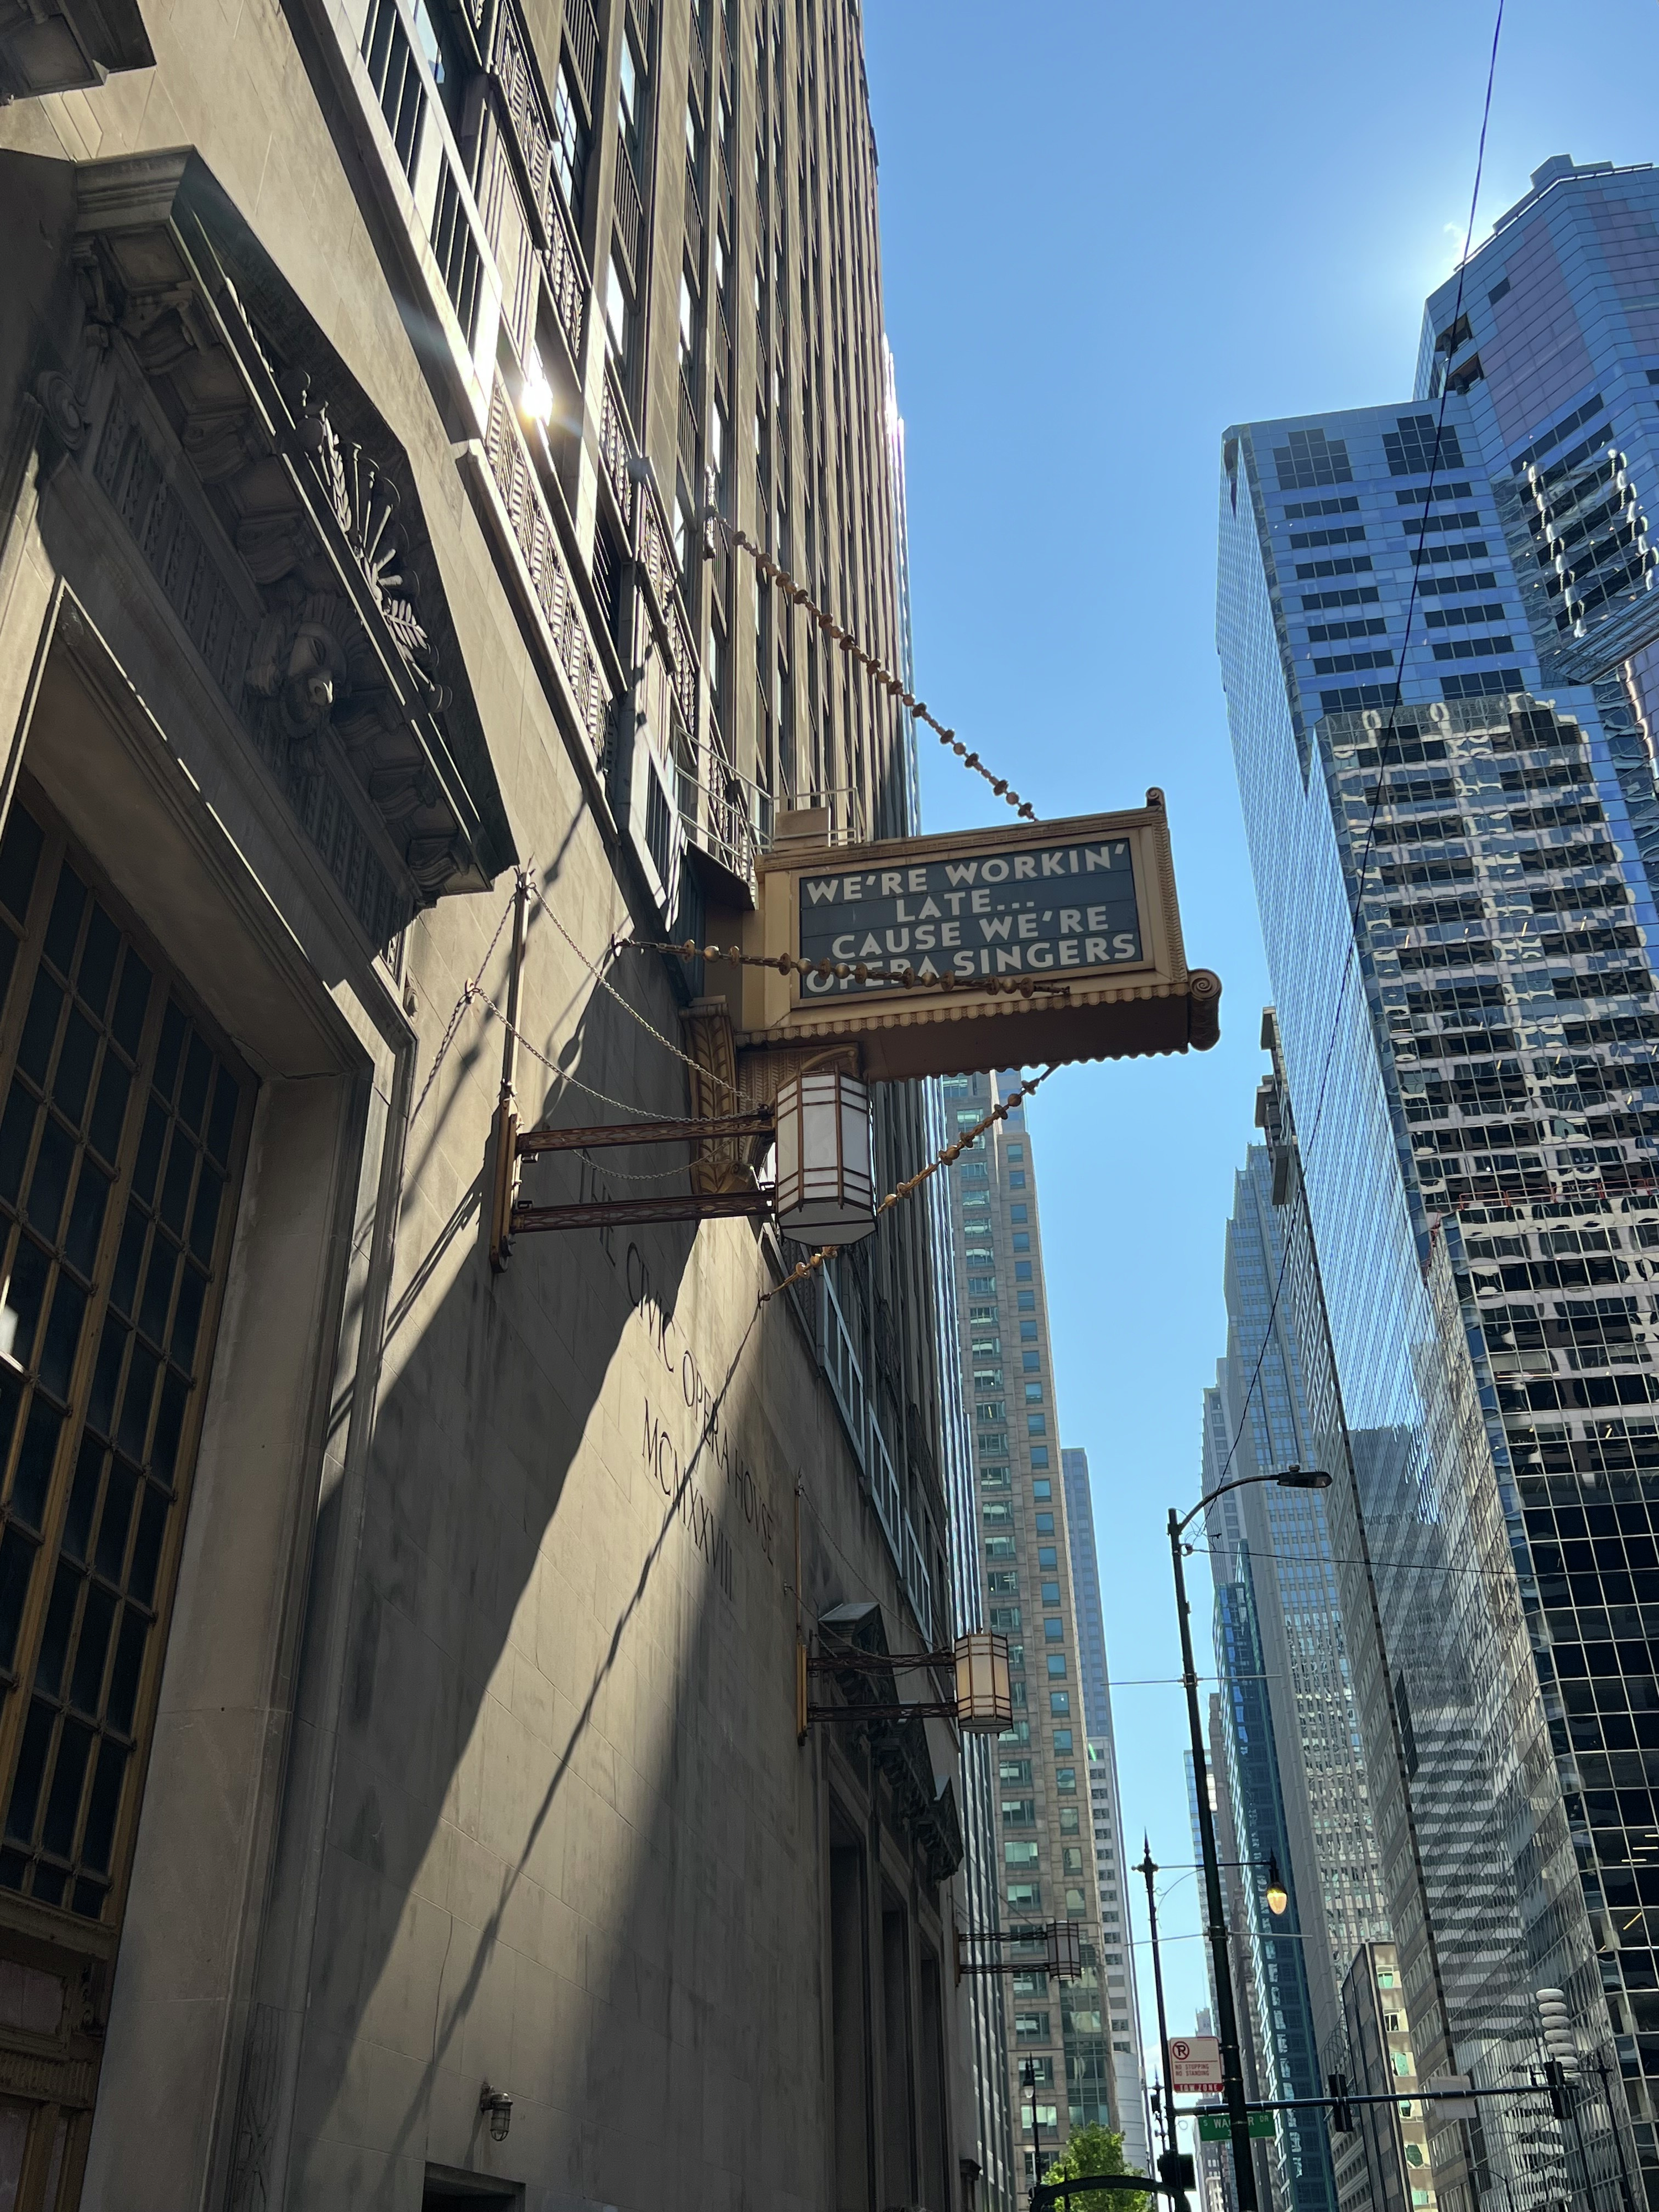 Lyric Opera was ‘working late’ on their new marquee messages